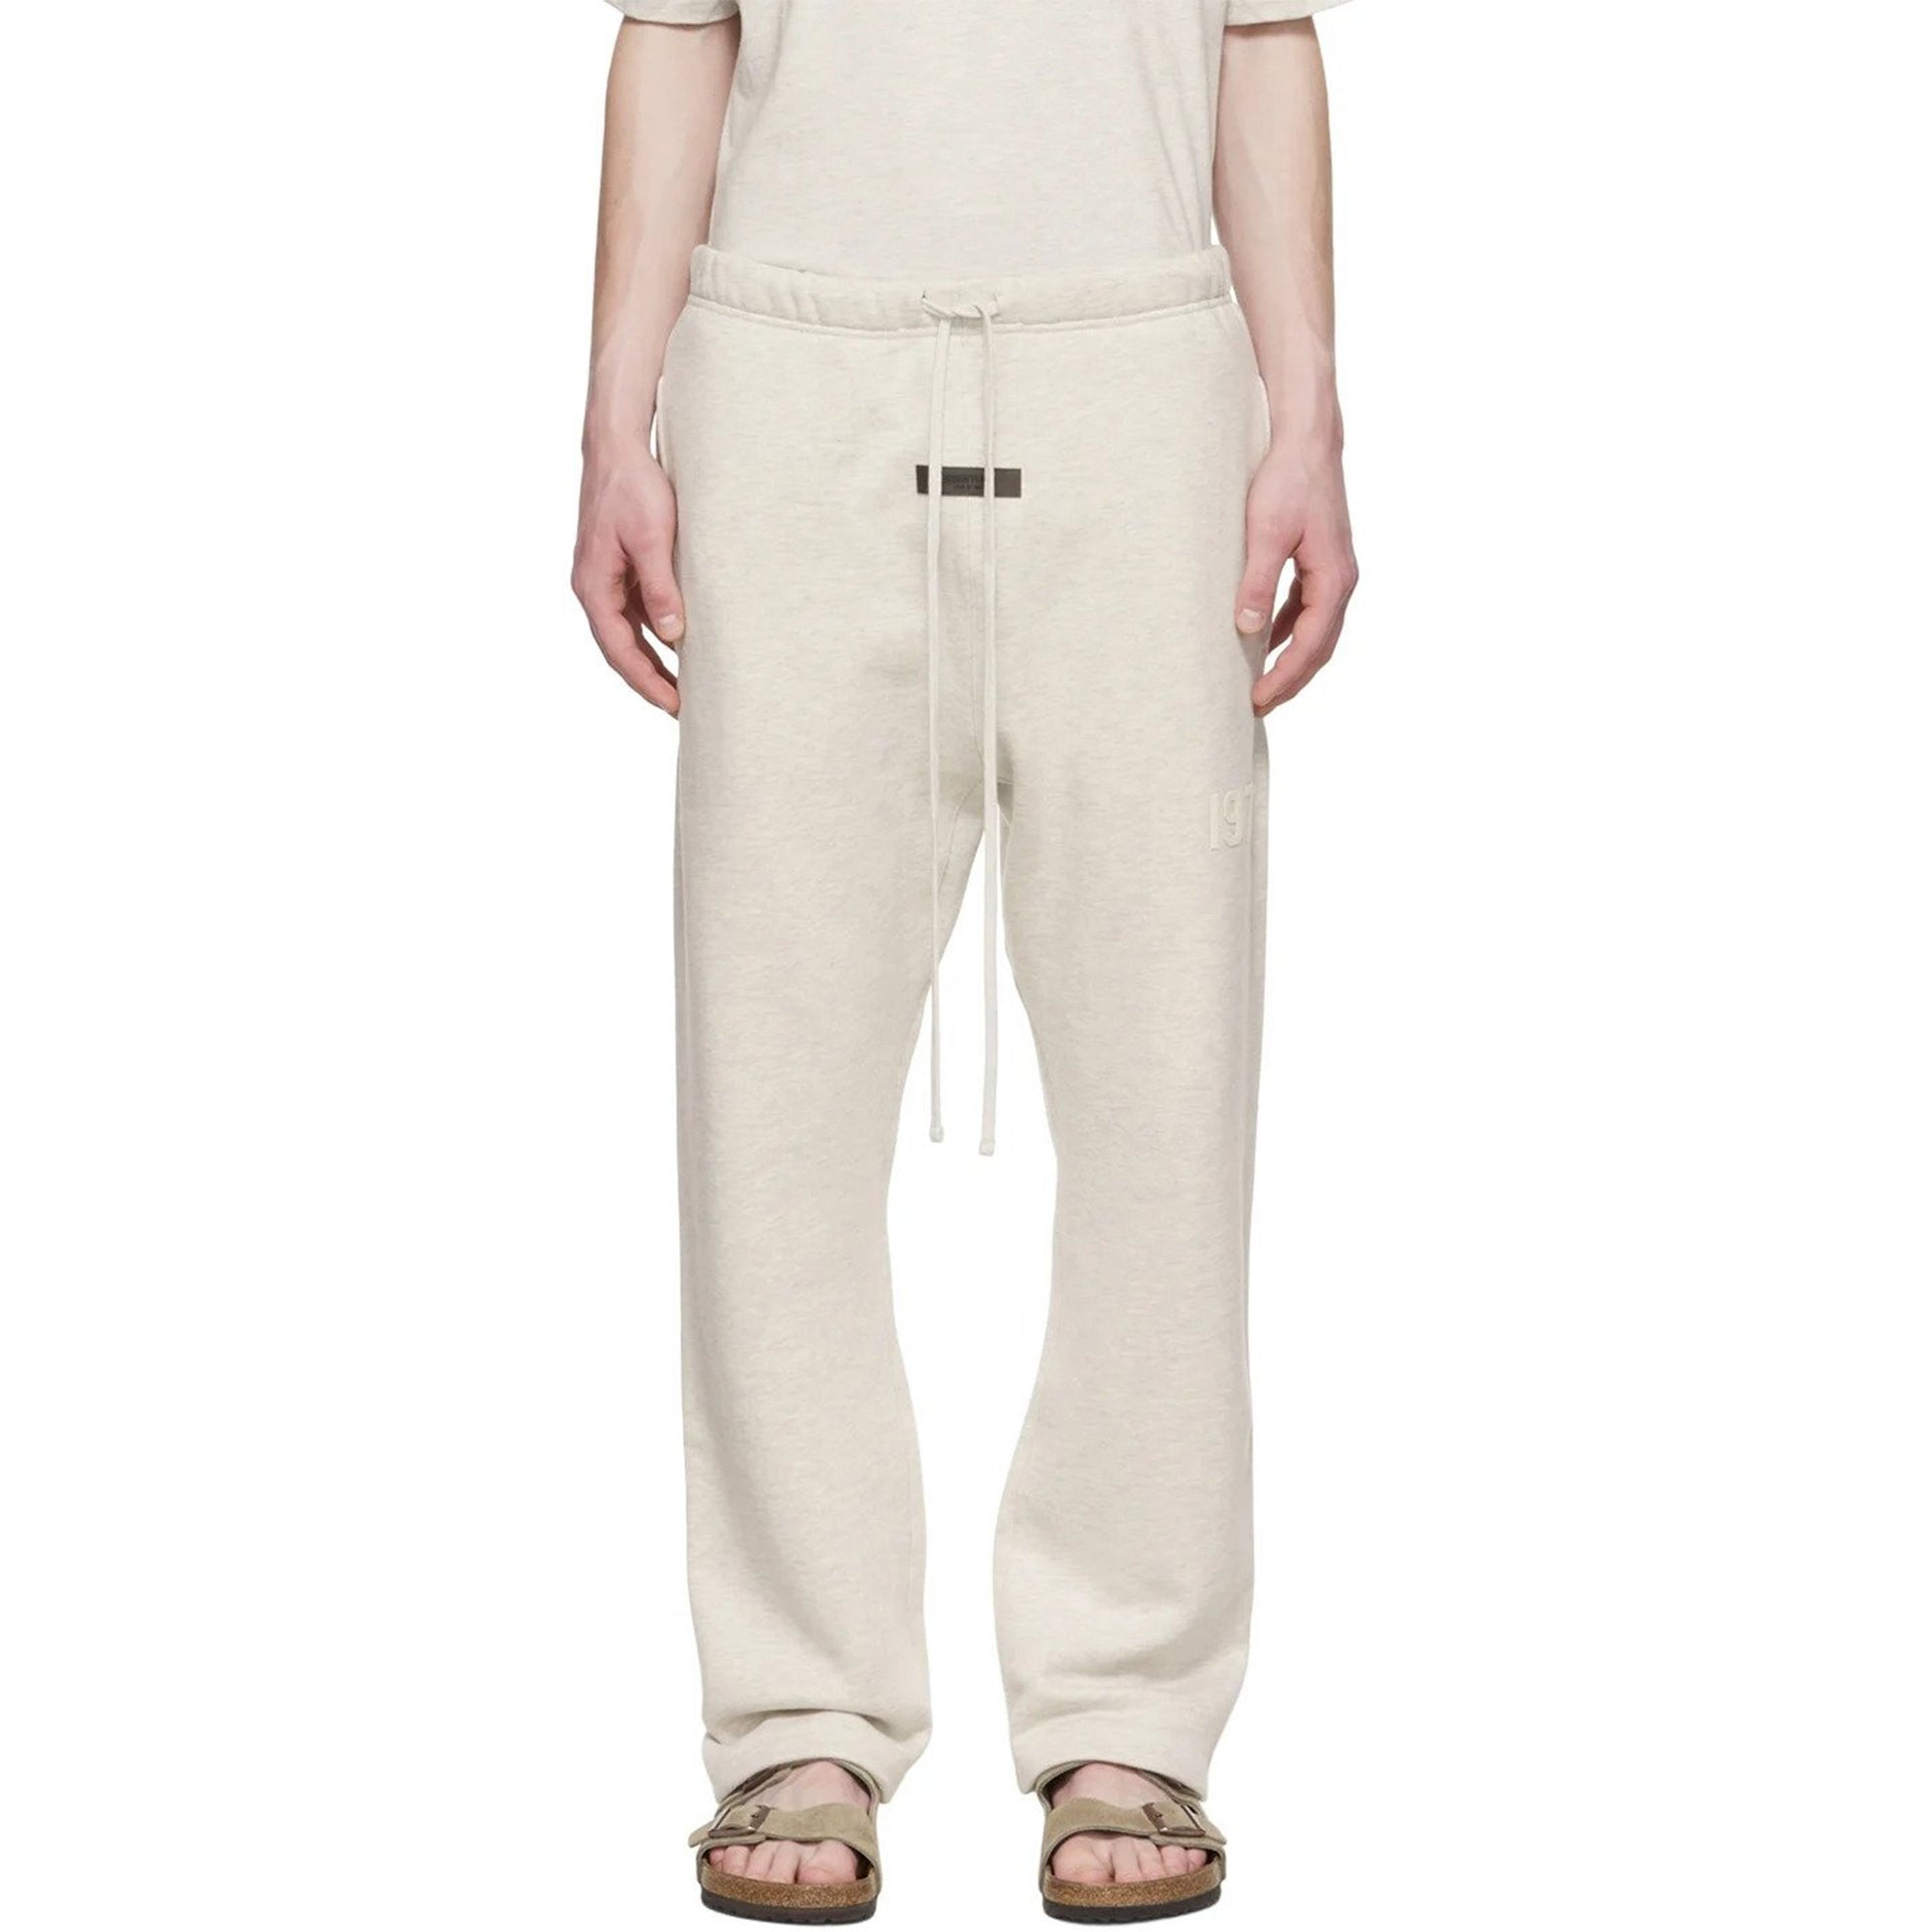 ESSENTIALS off white lounge pants